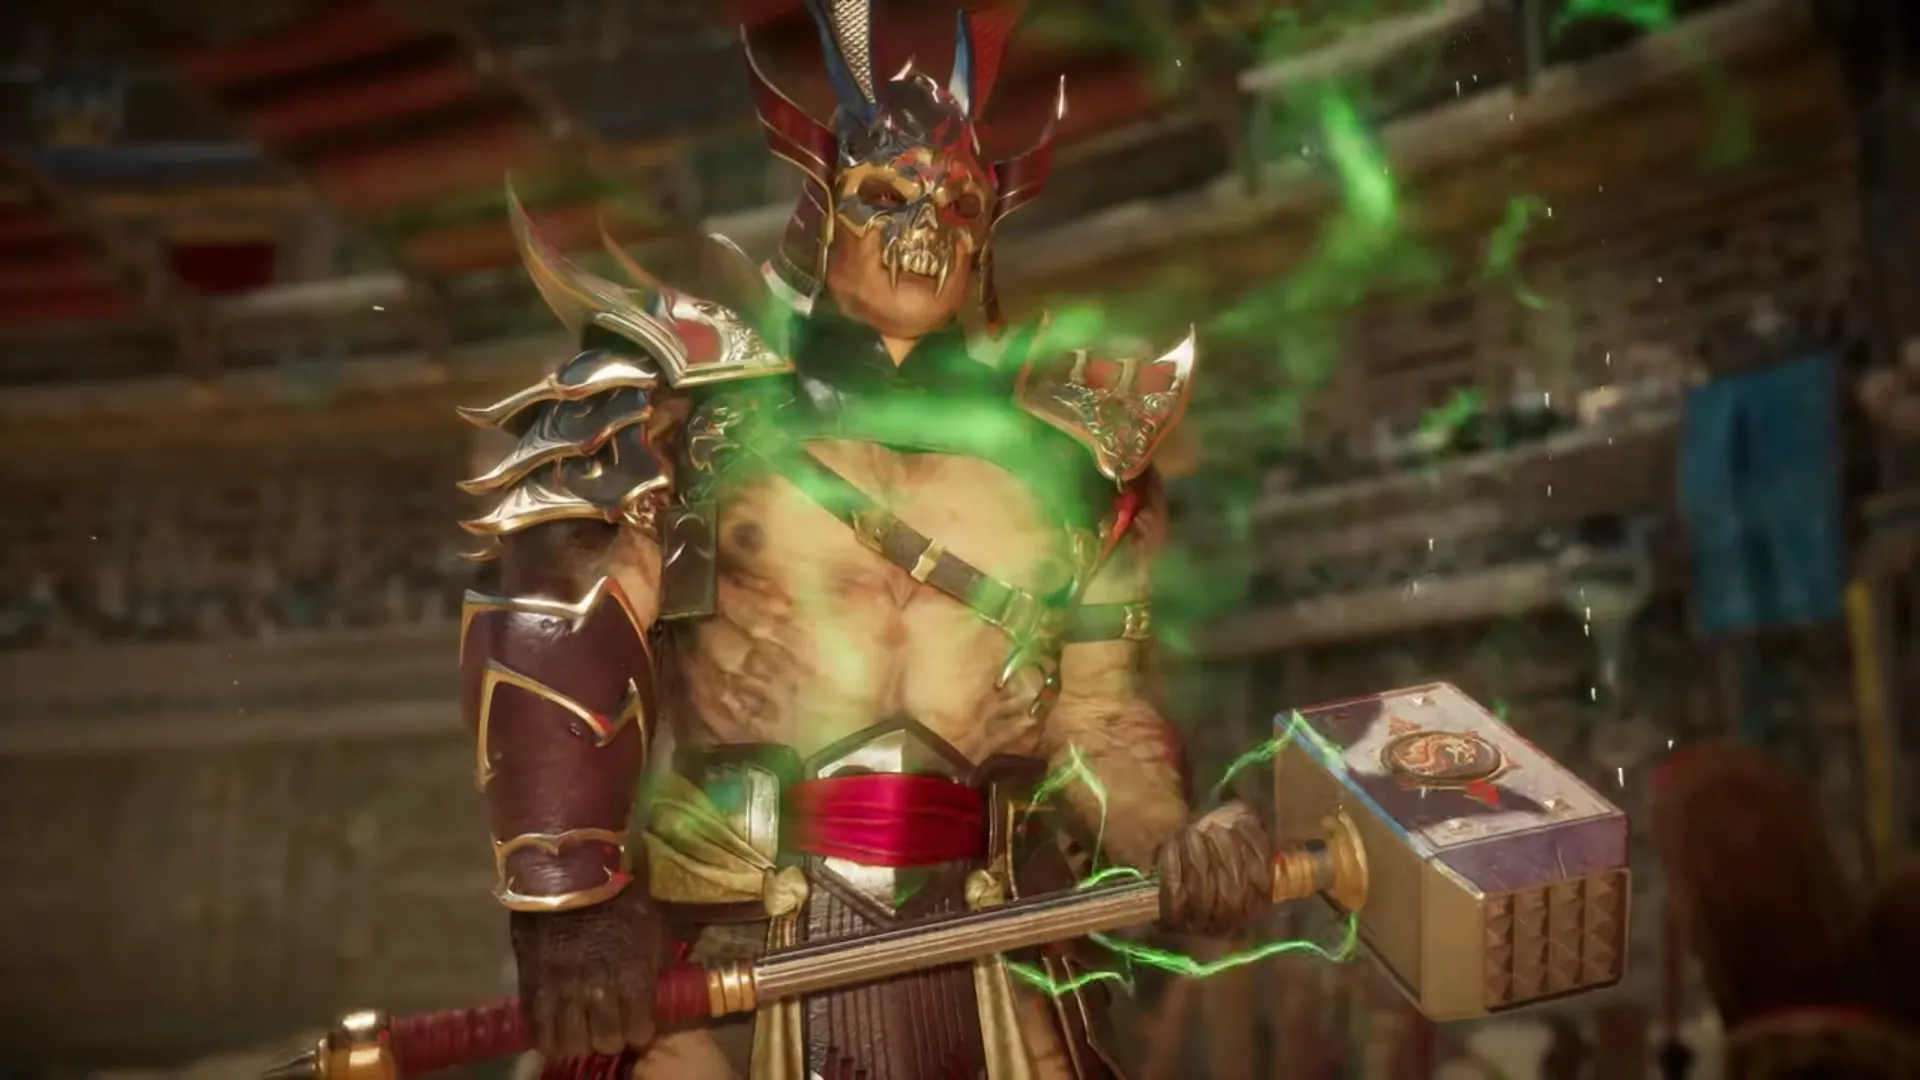 Fanatical on X: Often the final boss, Shao Kahn has developed since his  Mortal Kombat debut. You can also boss your weekend by picking up Mortal  Kombat 11 as our Star Deal